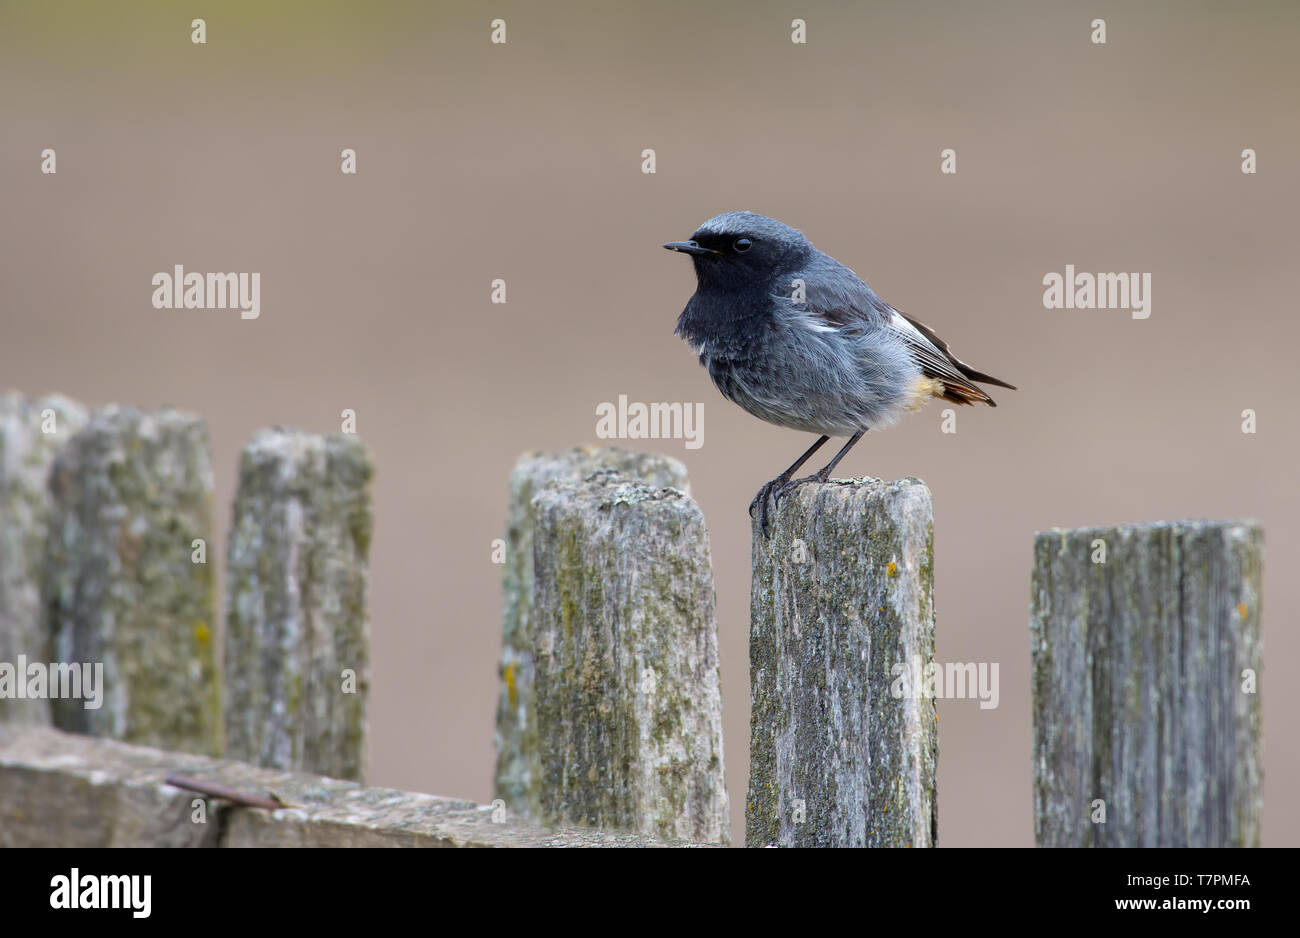 Male Black Redstart with short tail feathers perched on an aged wooden fence Stock Photo